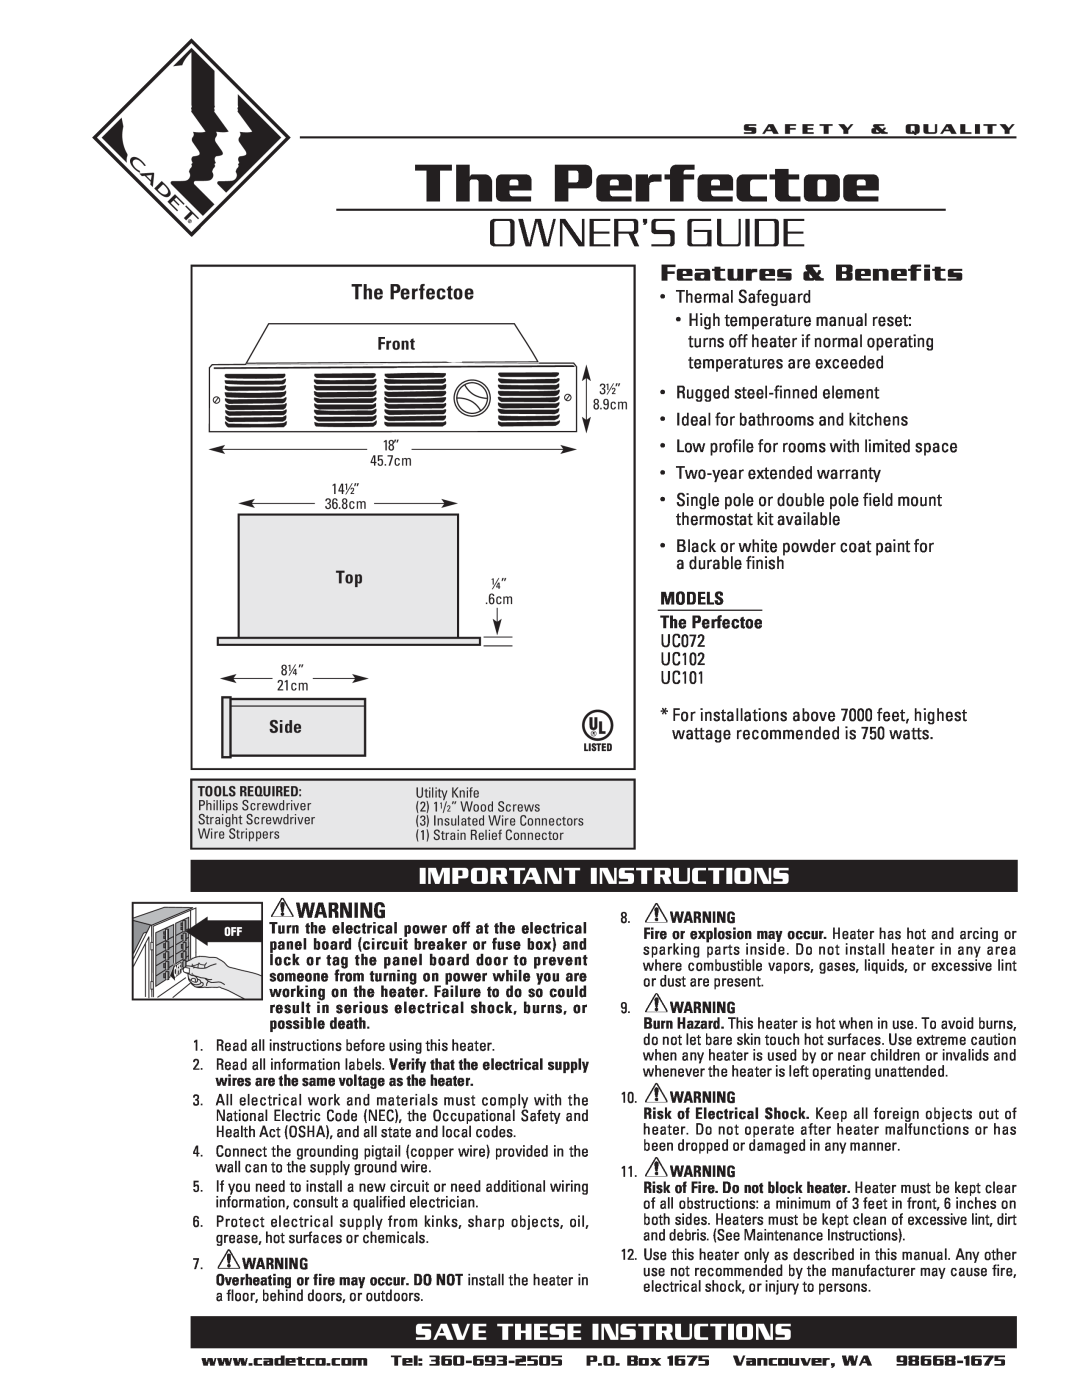 Cadet UC072 warranty The Perfectoe, Owner’S Guide, Features & Benefits, Important Instructions, Save These Instructions 